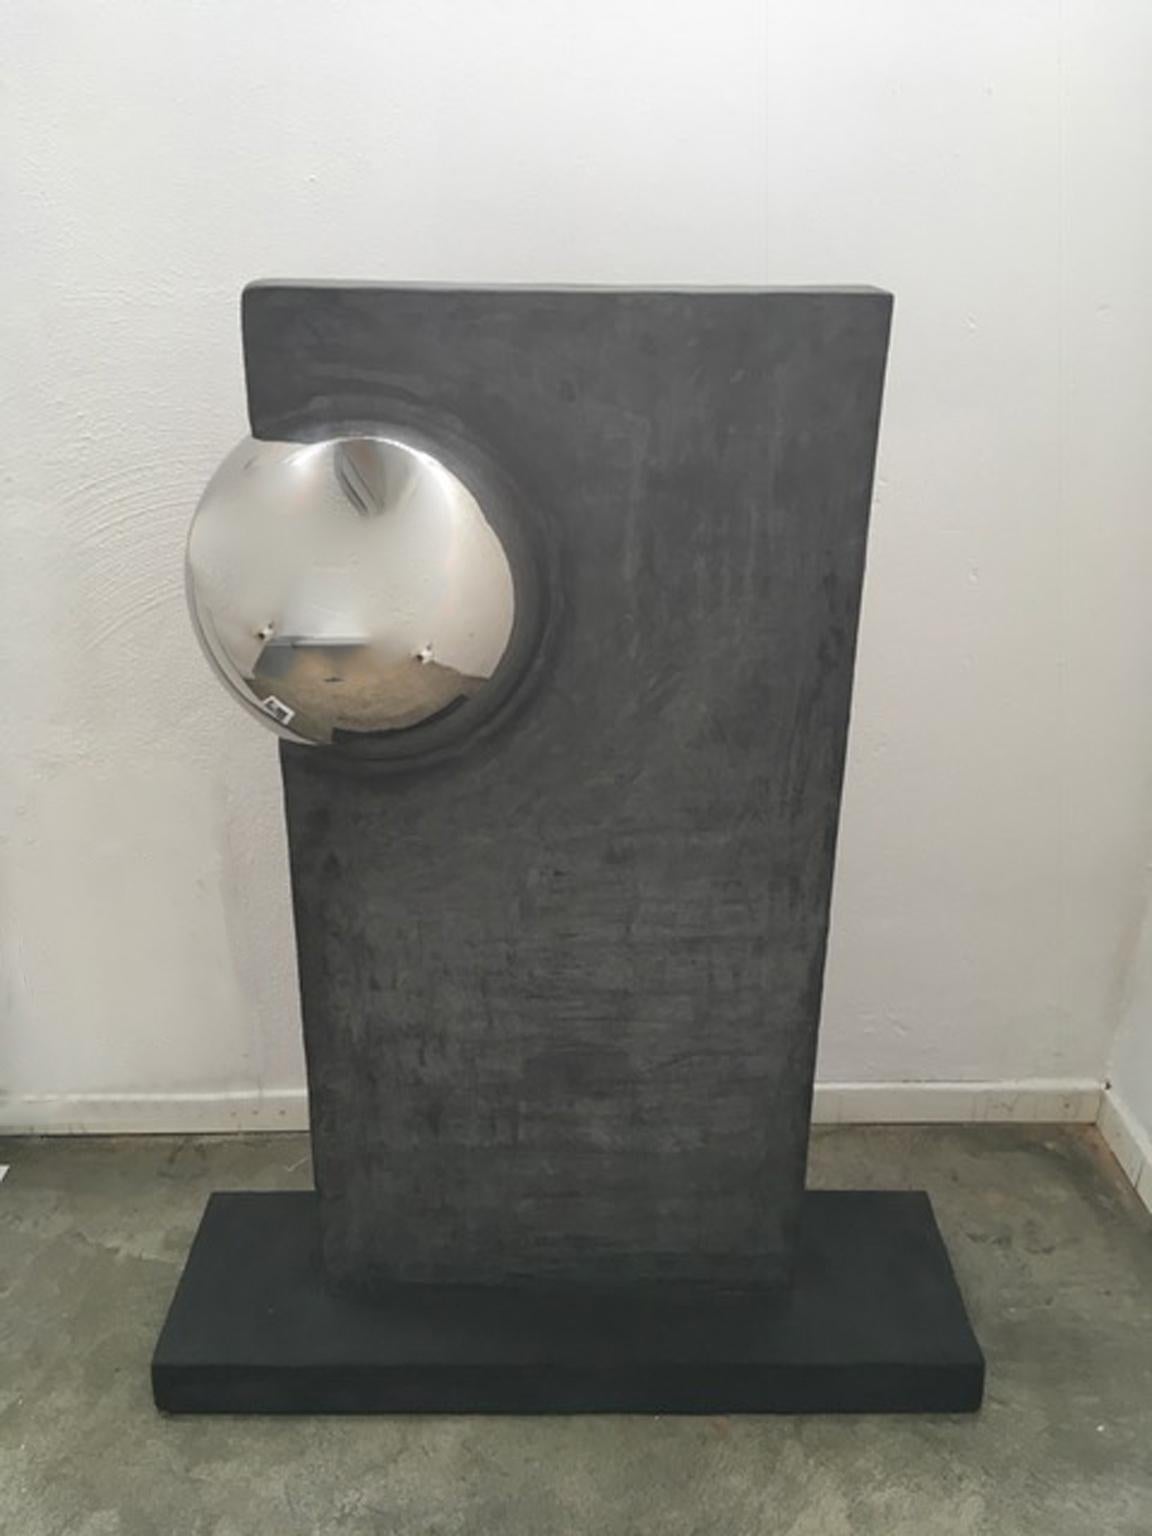 Stele with sphere Italy 2000 Polyester Grey Colored Mortar with Chrome Sphere - Sculpture by Antonio De Martino